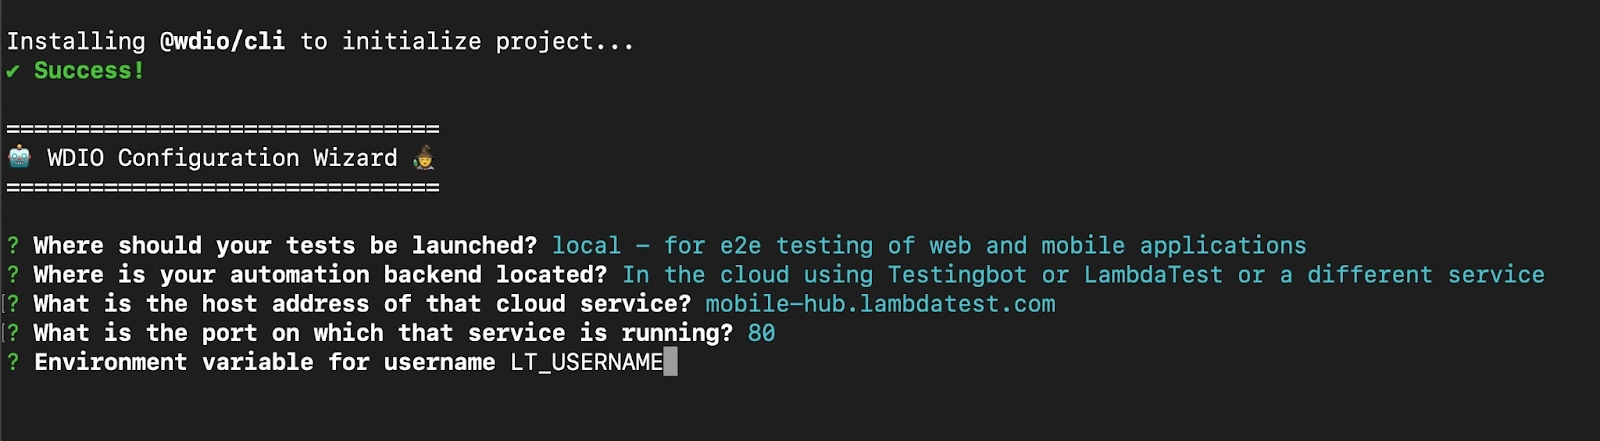 when we are running the tests on cloud